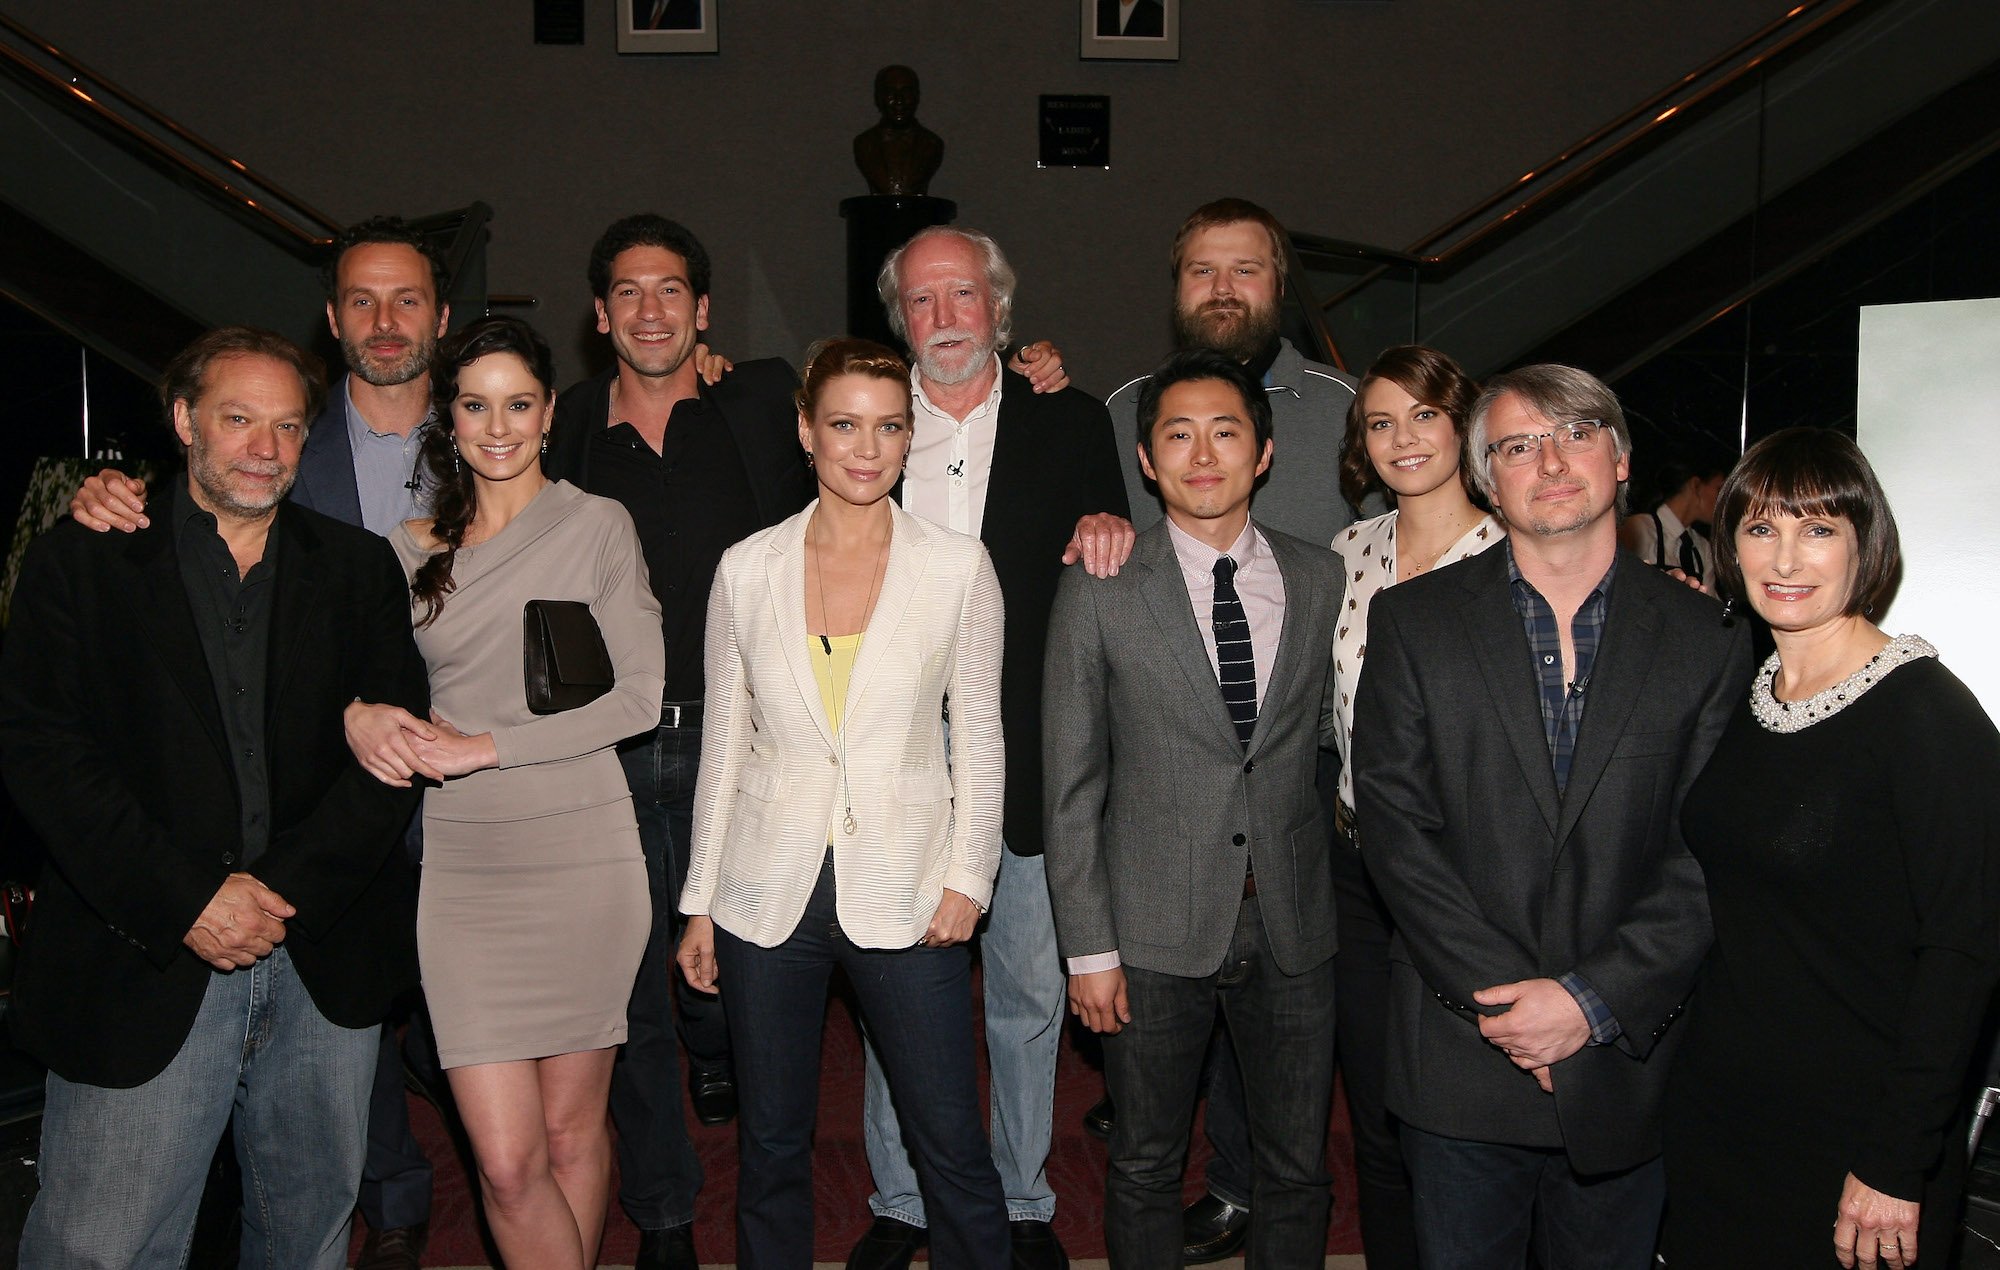 Cast and crew members of 'The Walking Dead' in front of staircases